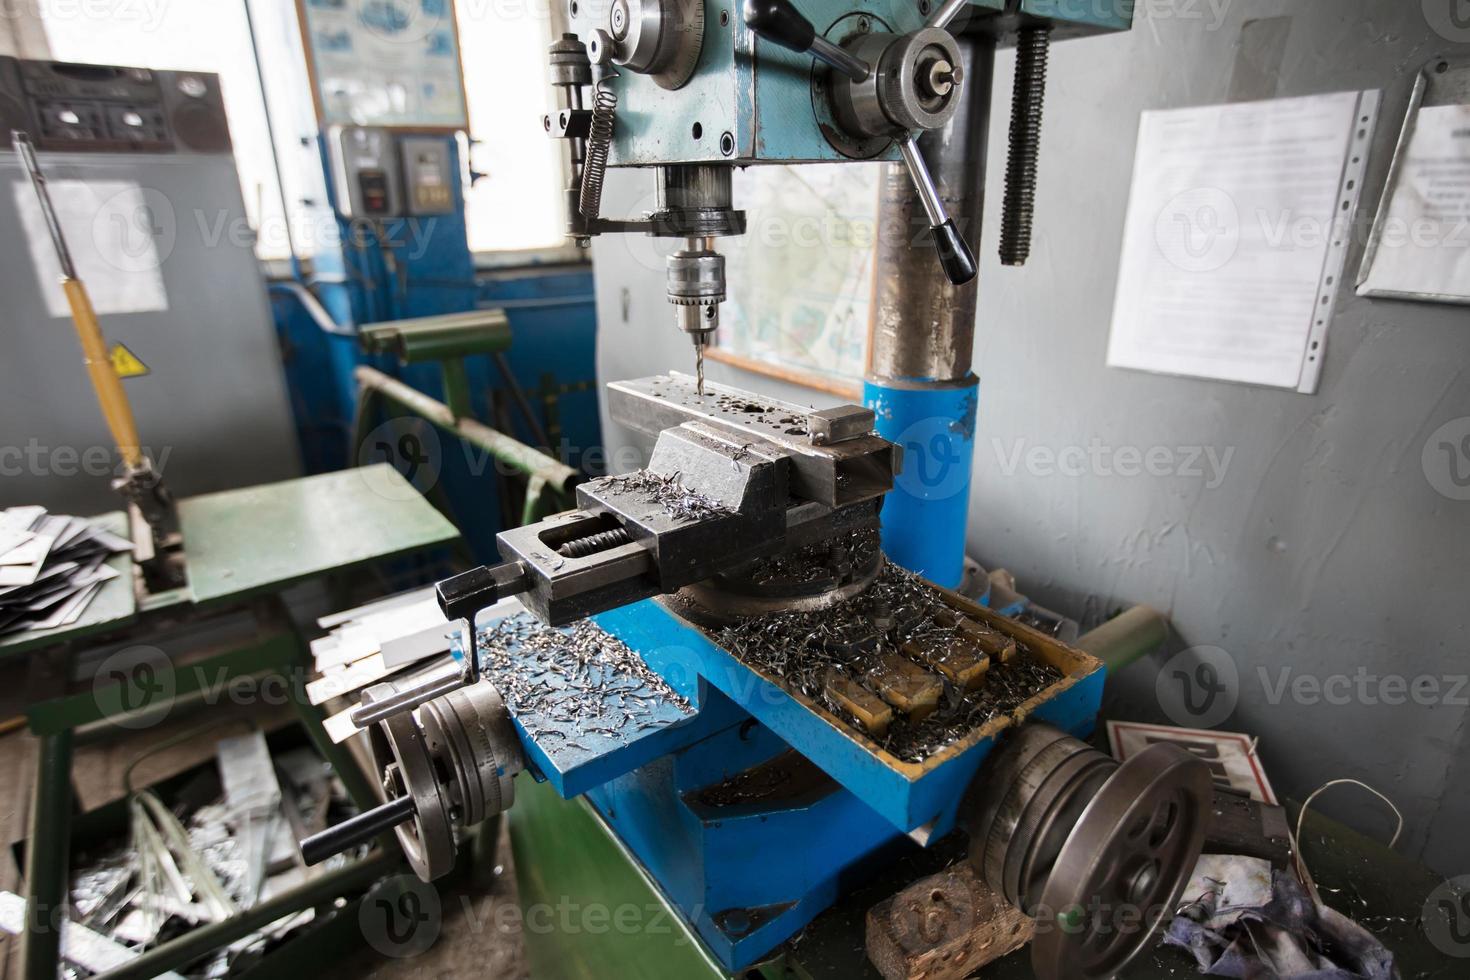 An old-style lathe in the workshop. photo